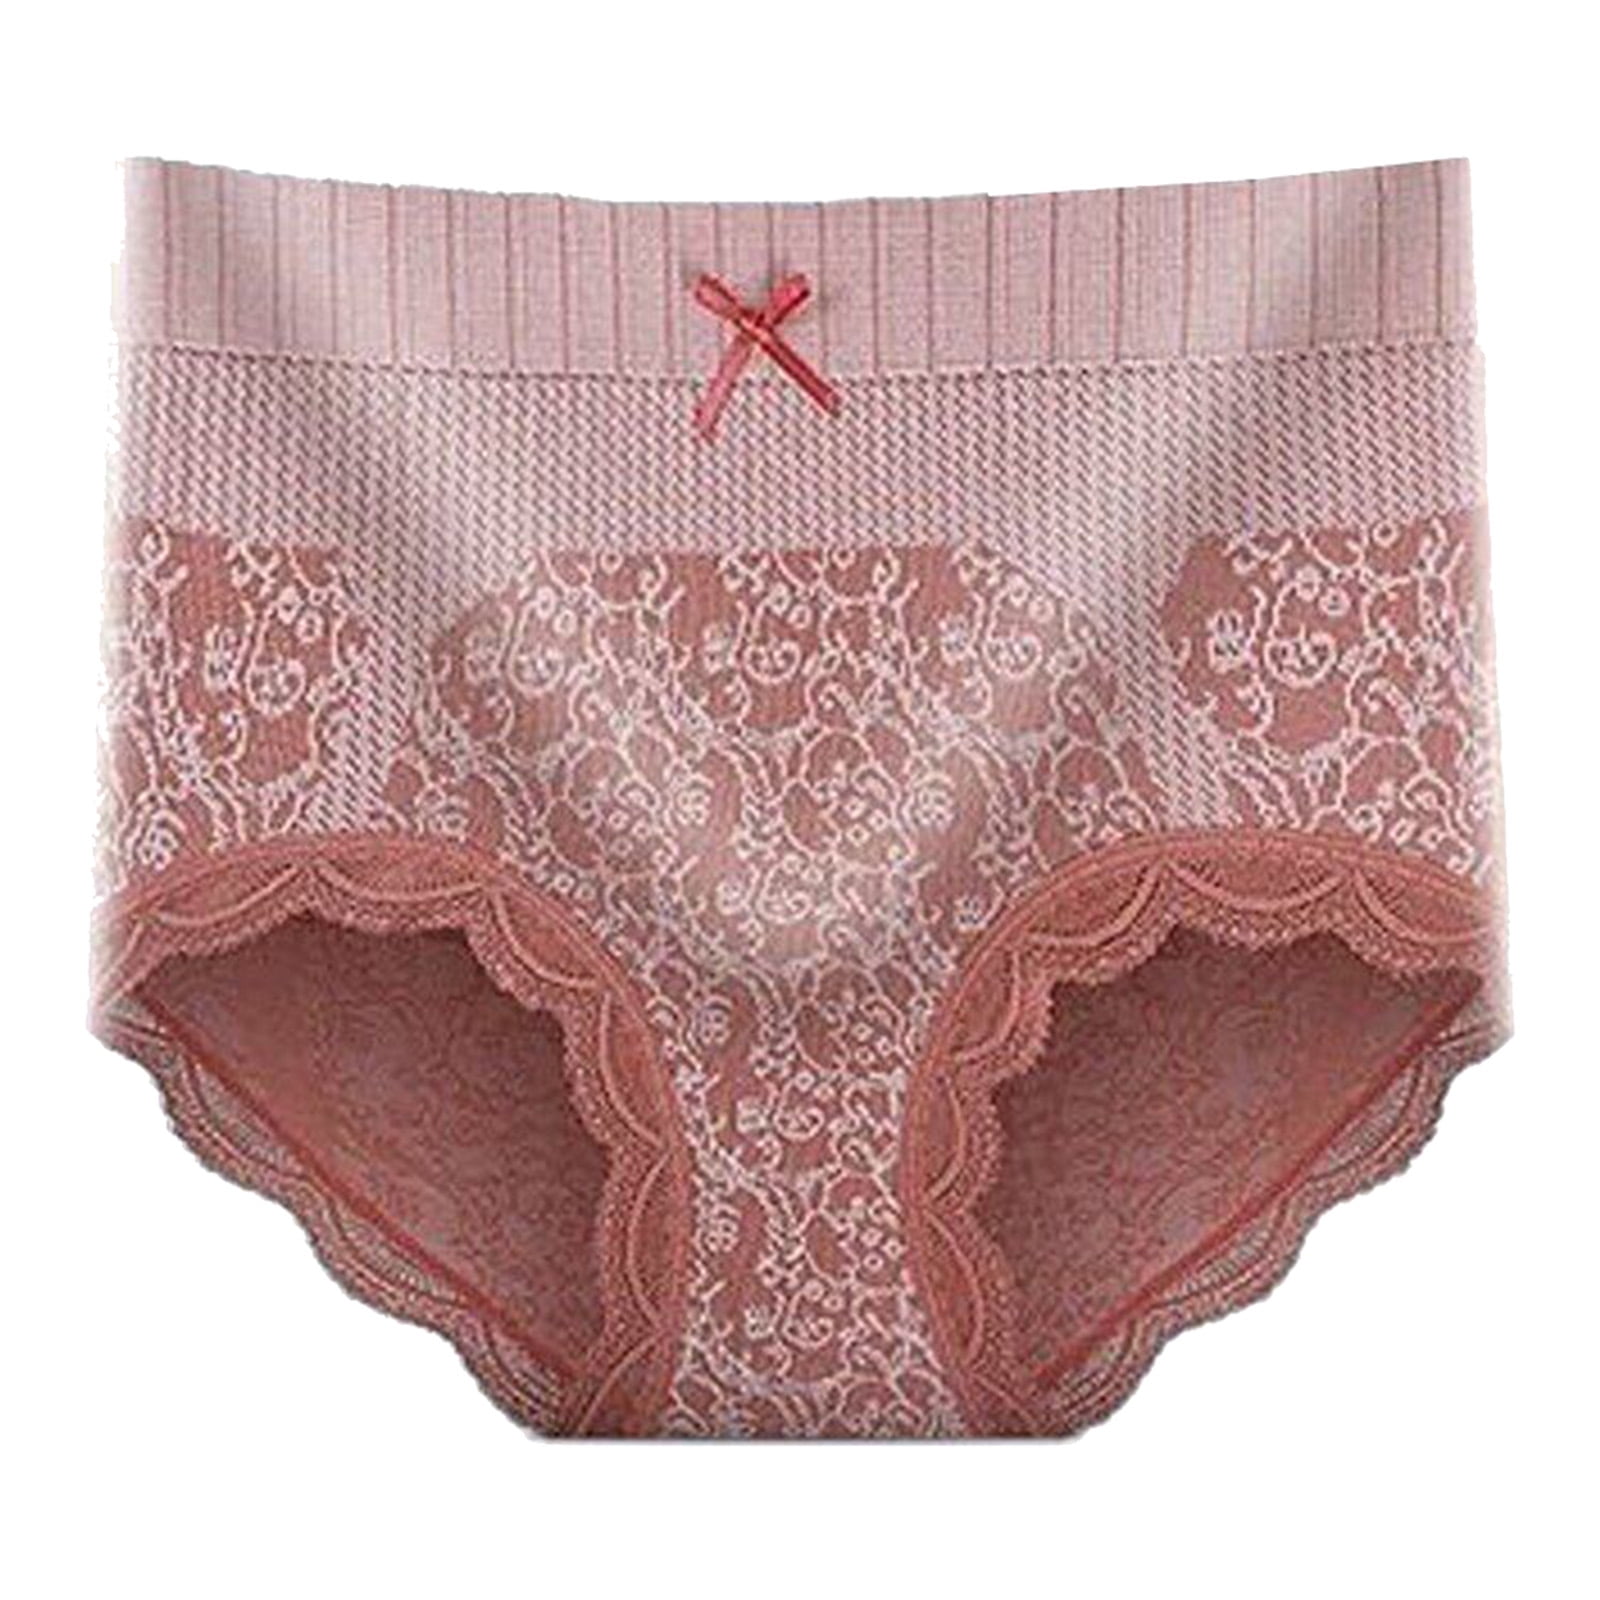 PMUYBHF Underwear Women Cotton No Show Women's Casual Solid Color High  Waisted Tight Lace Underwear Women Underwear Boyshorts 